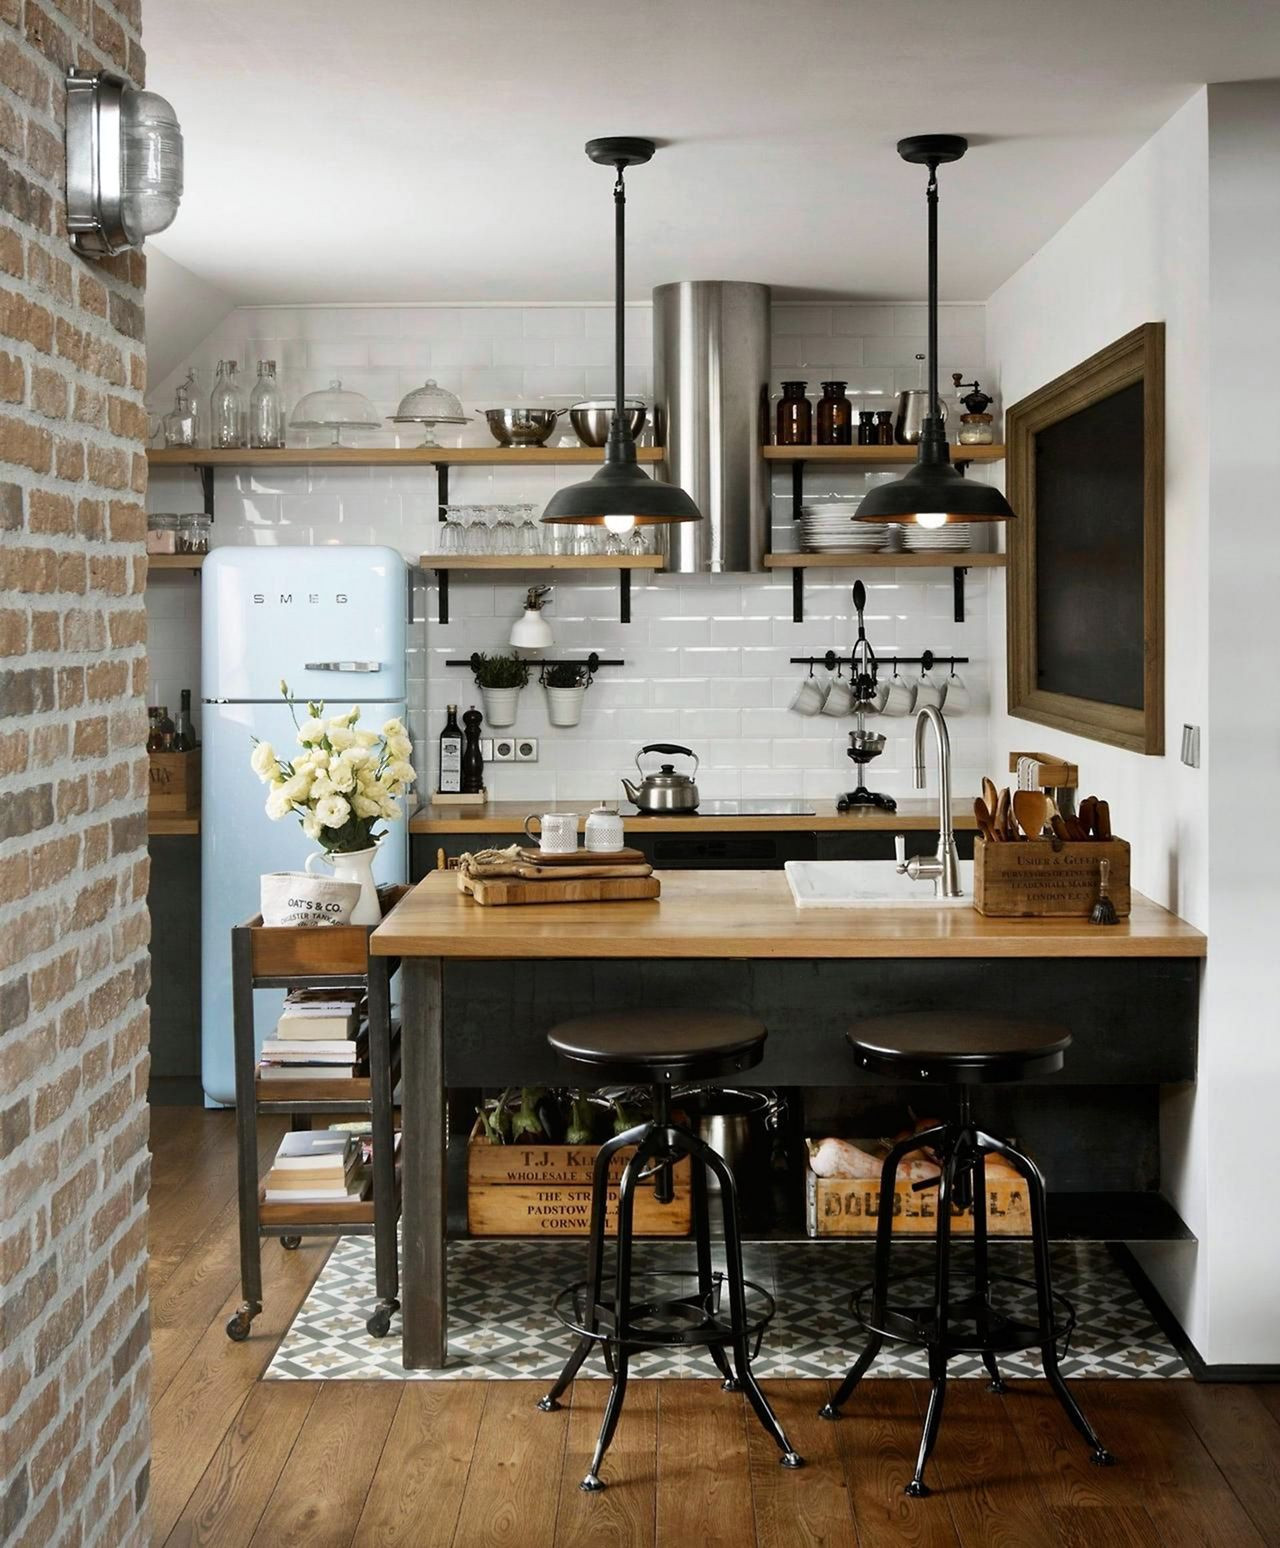 Small Kitchen Ideas 2020
 13 Amazing Small Industrial Kitchen Design Ideas You Have